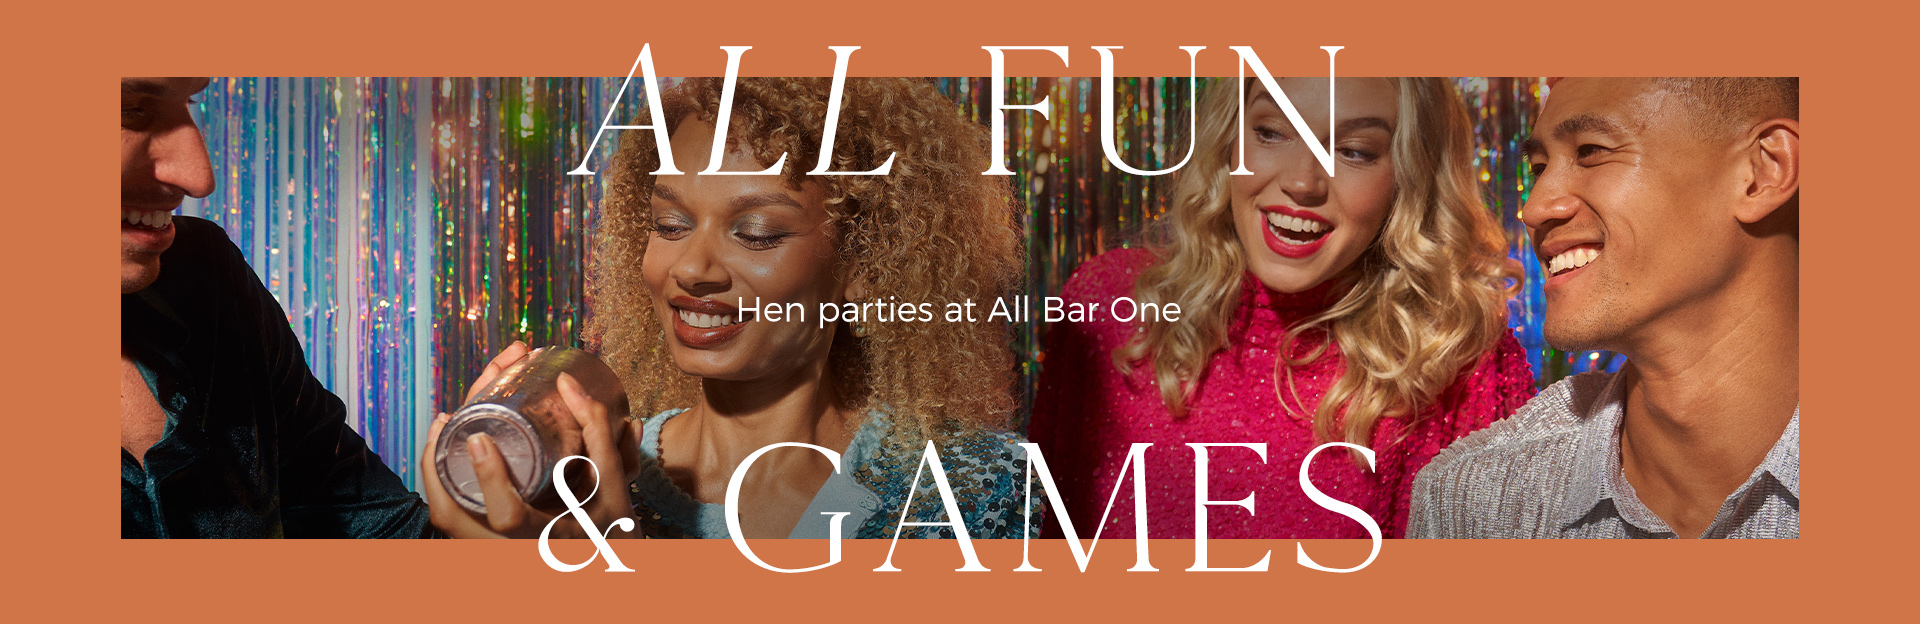 Hen parties at All Bar One Brindleyplace